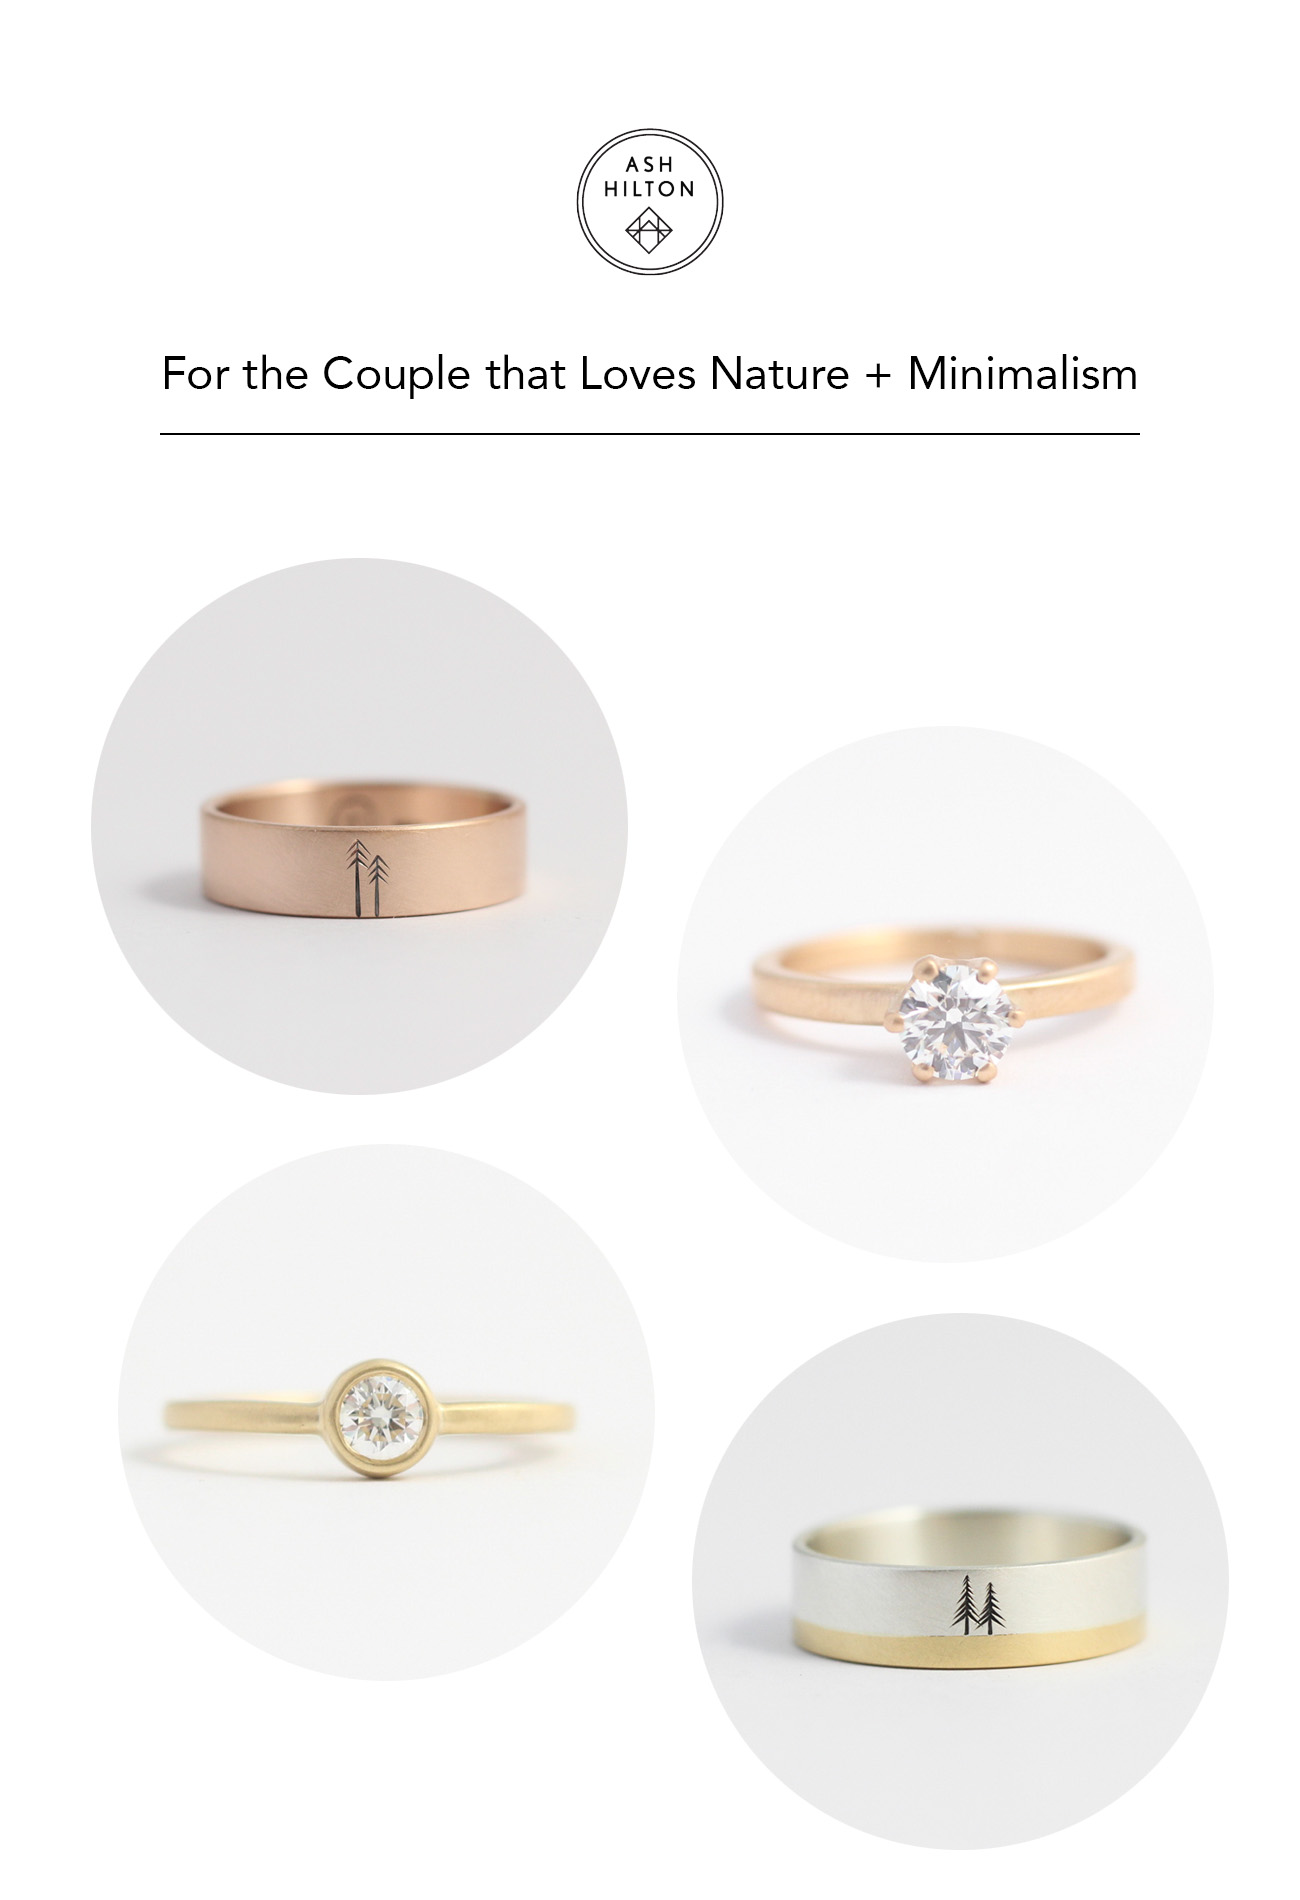 For the Couple That Loves Nature + Minimalism: Ash Hilton Jewellery